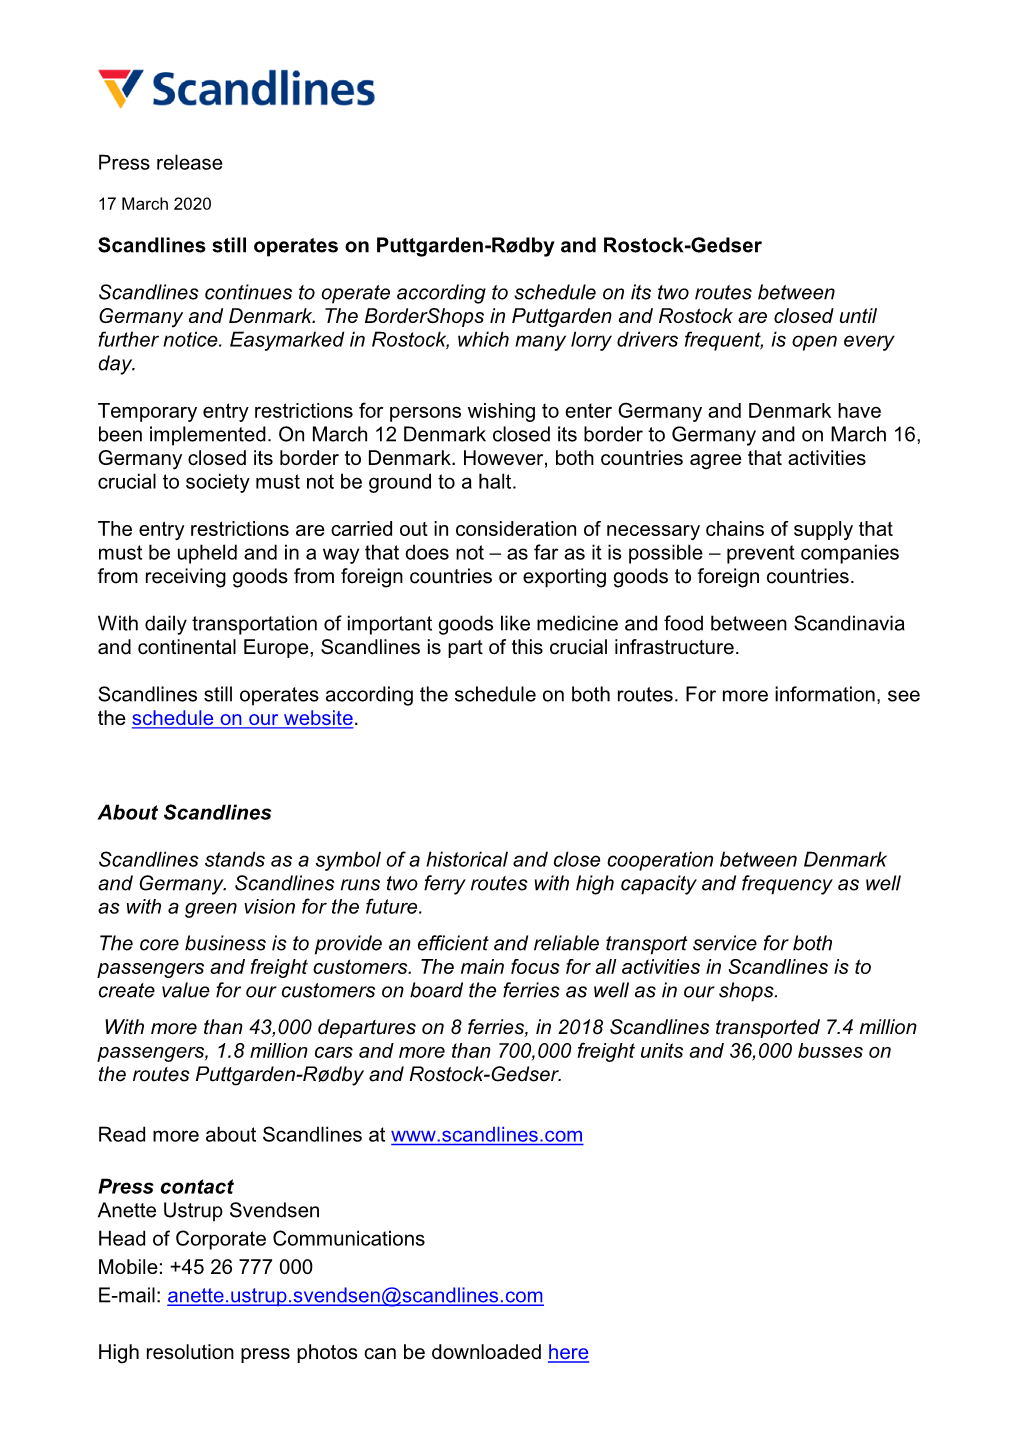 Press Release Scandlines Still Operates on Puttgarden-Rødby and Rostock-Gedser Scandlines Continues to Operate According To